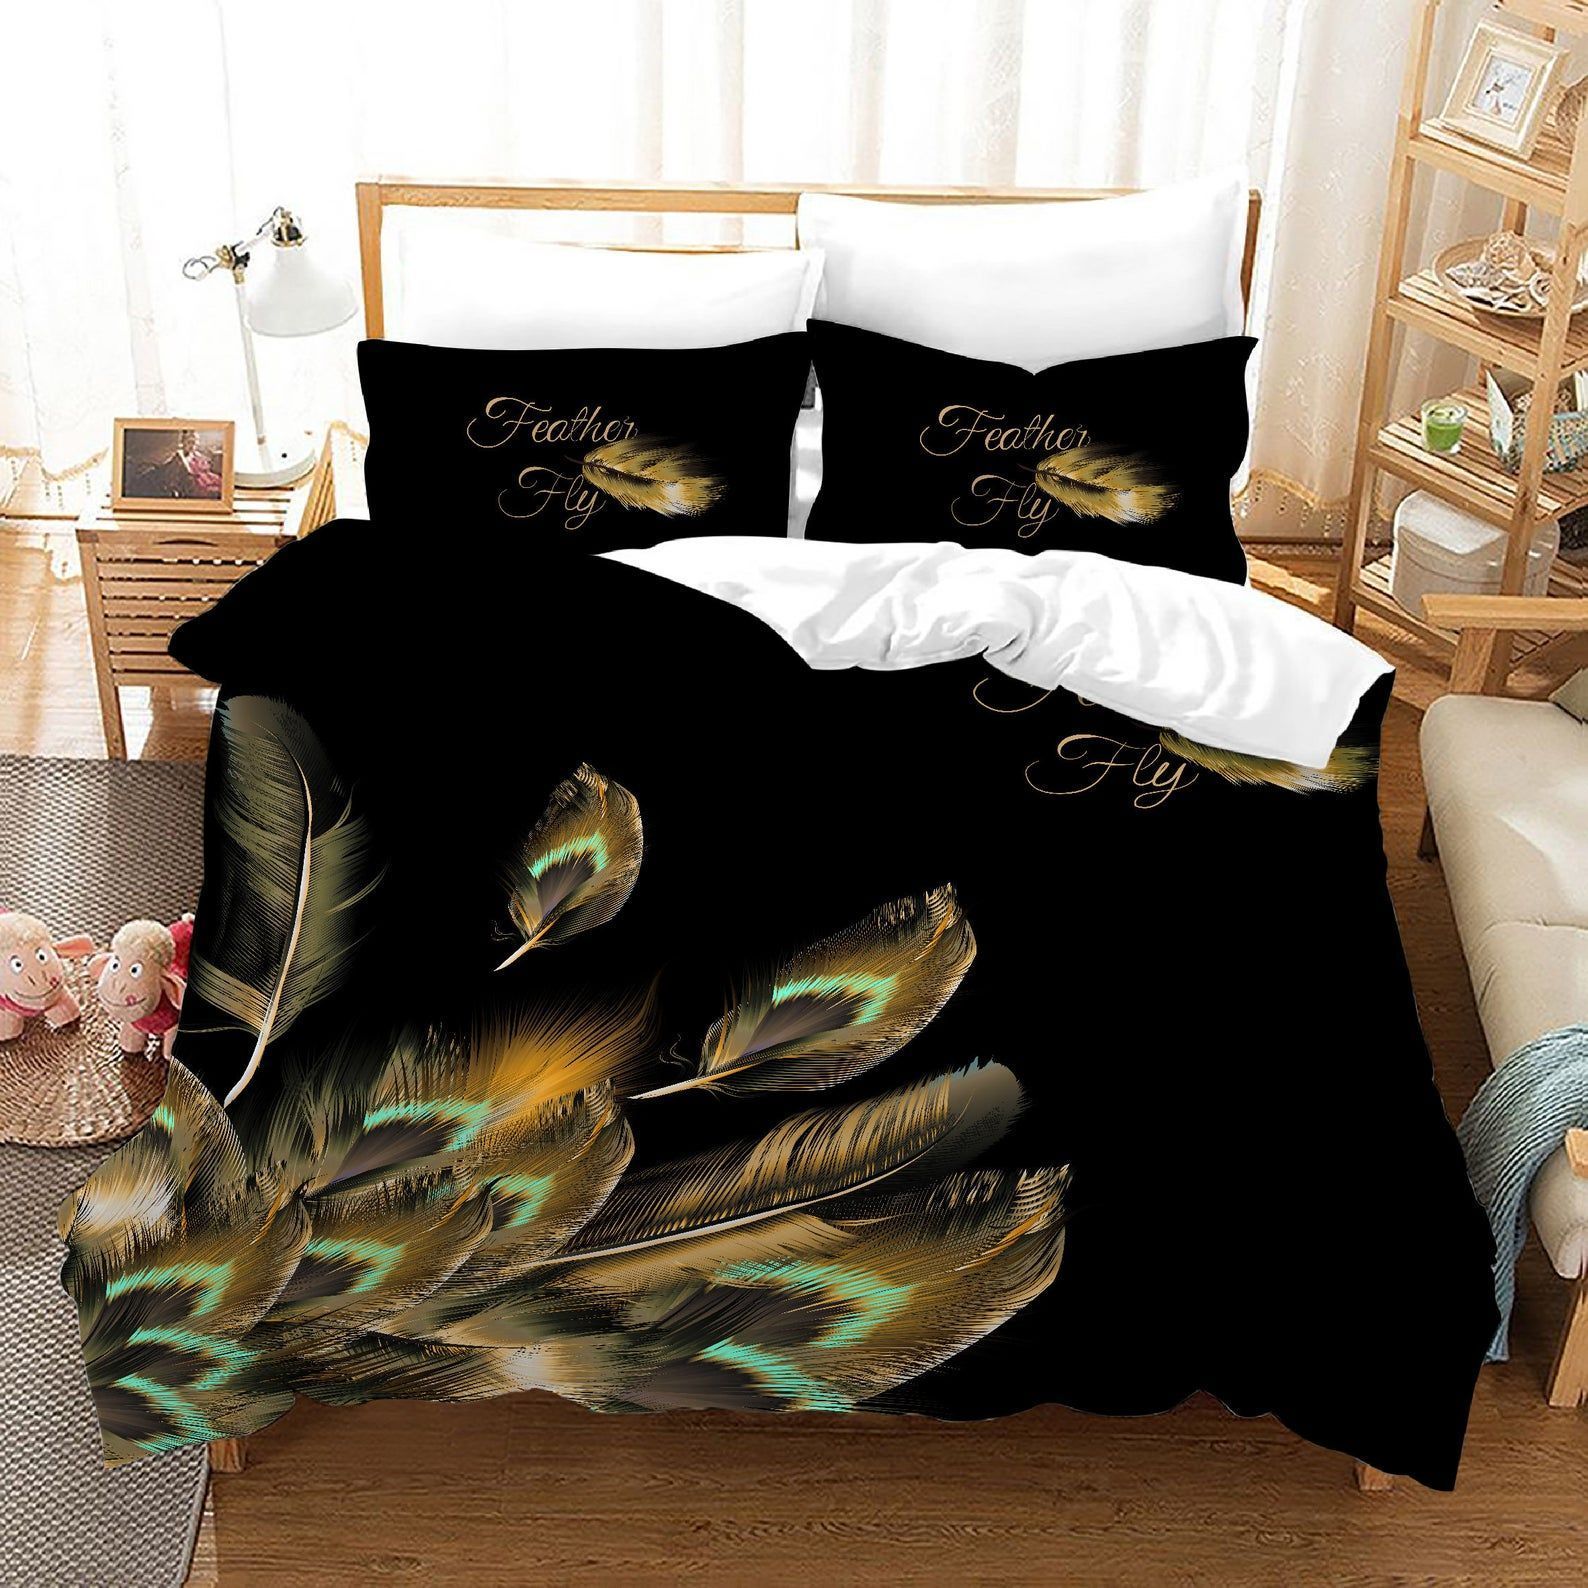 Peacock Feather Fly Black Bedding Set Bed Sheets Spread Comforter Duvet Cover Bedding Sets